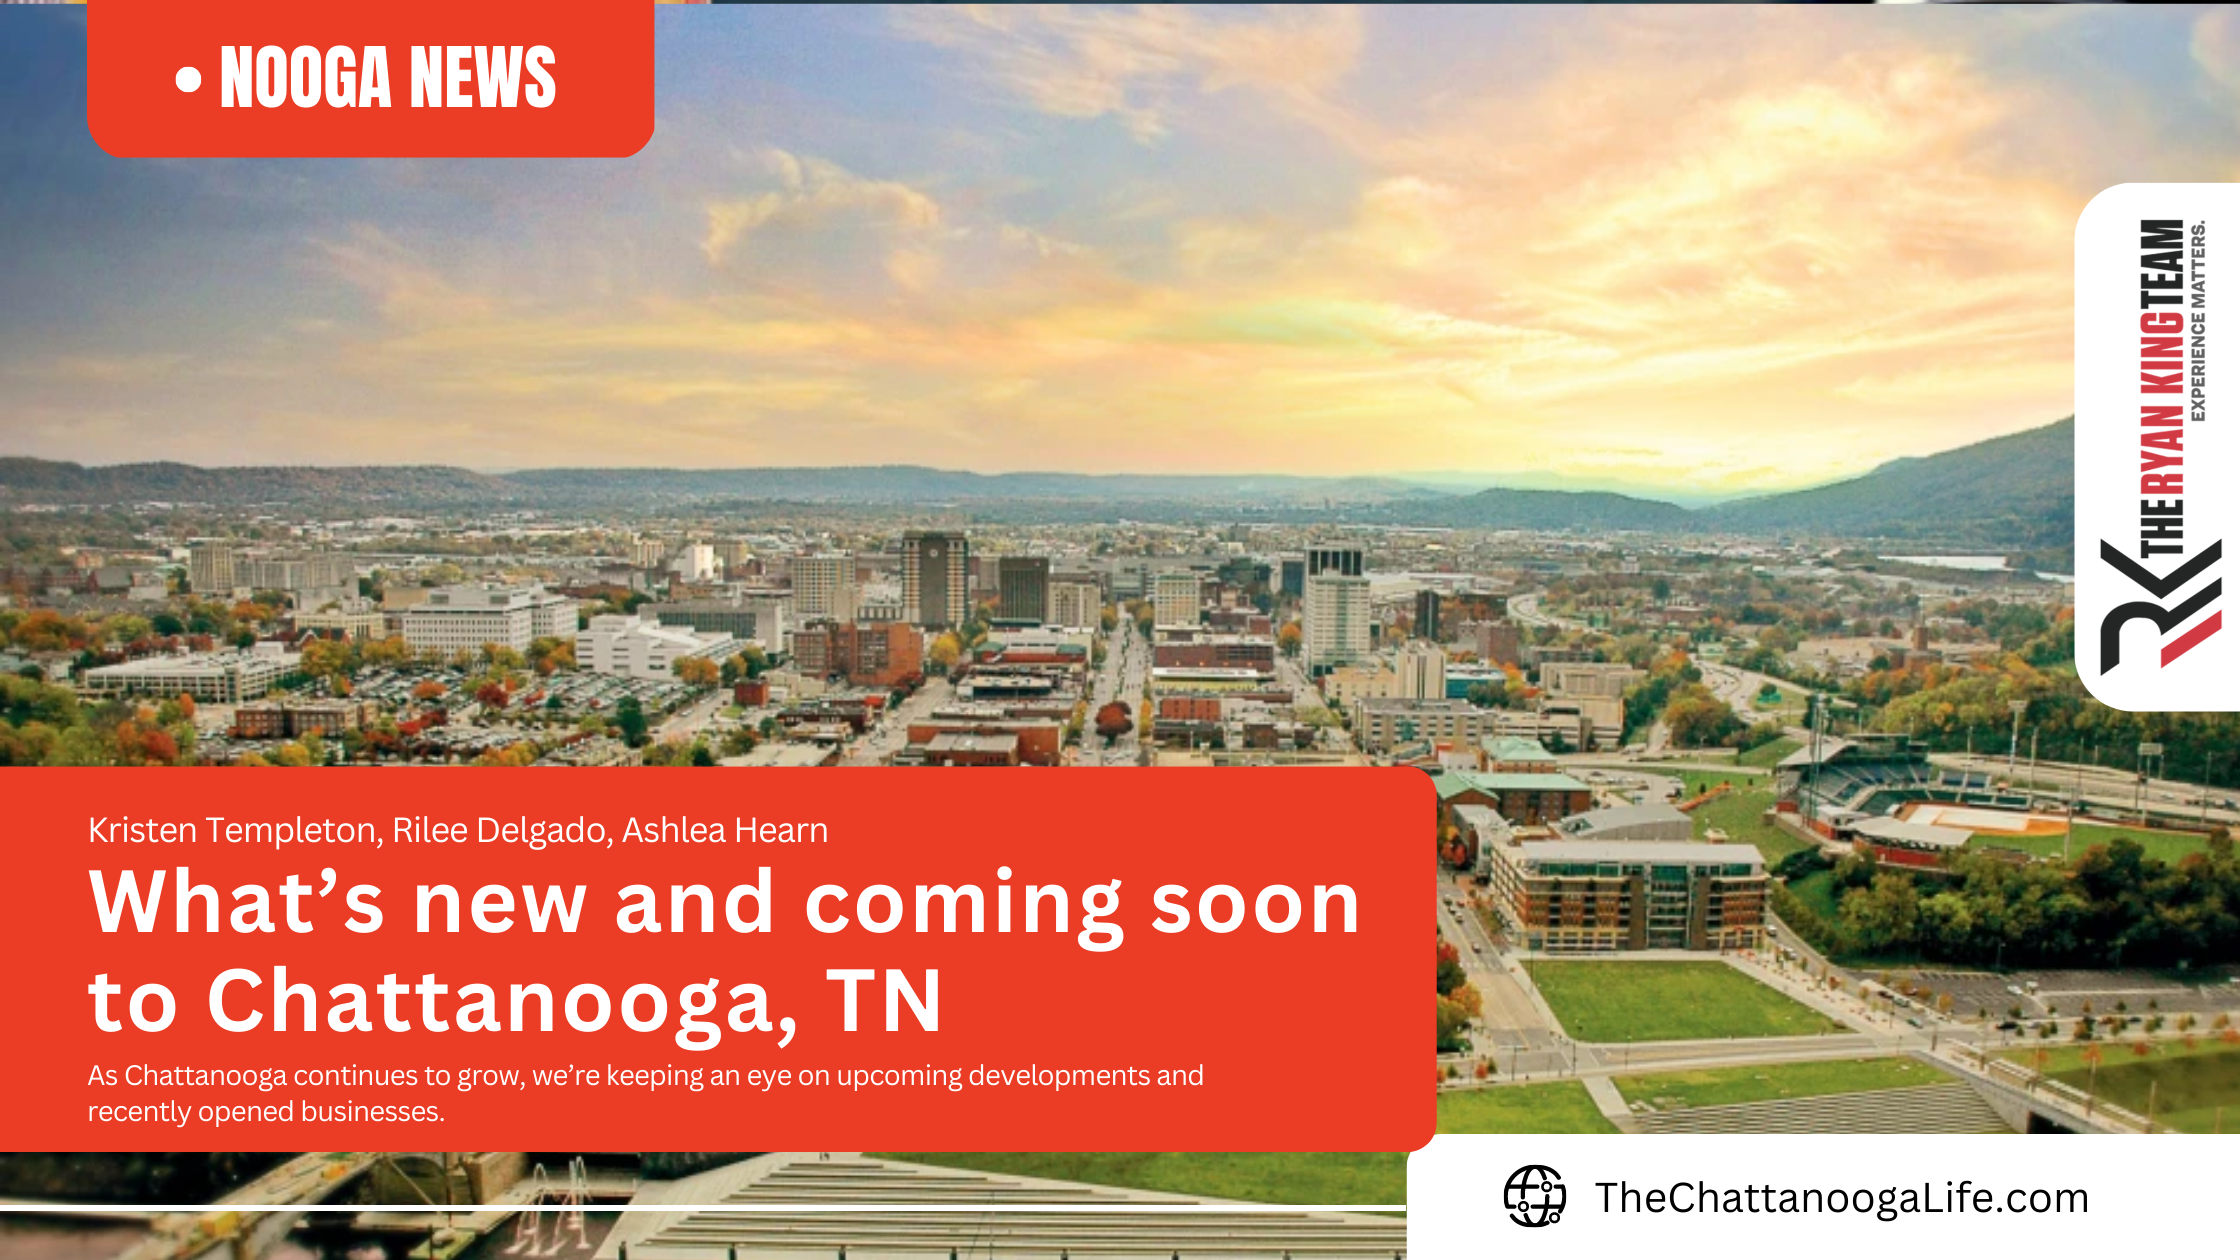 What’s new and coming soon to Chattanooga, TN